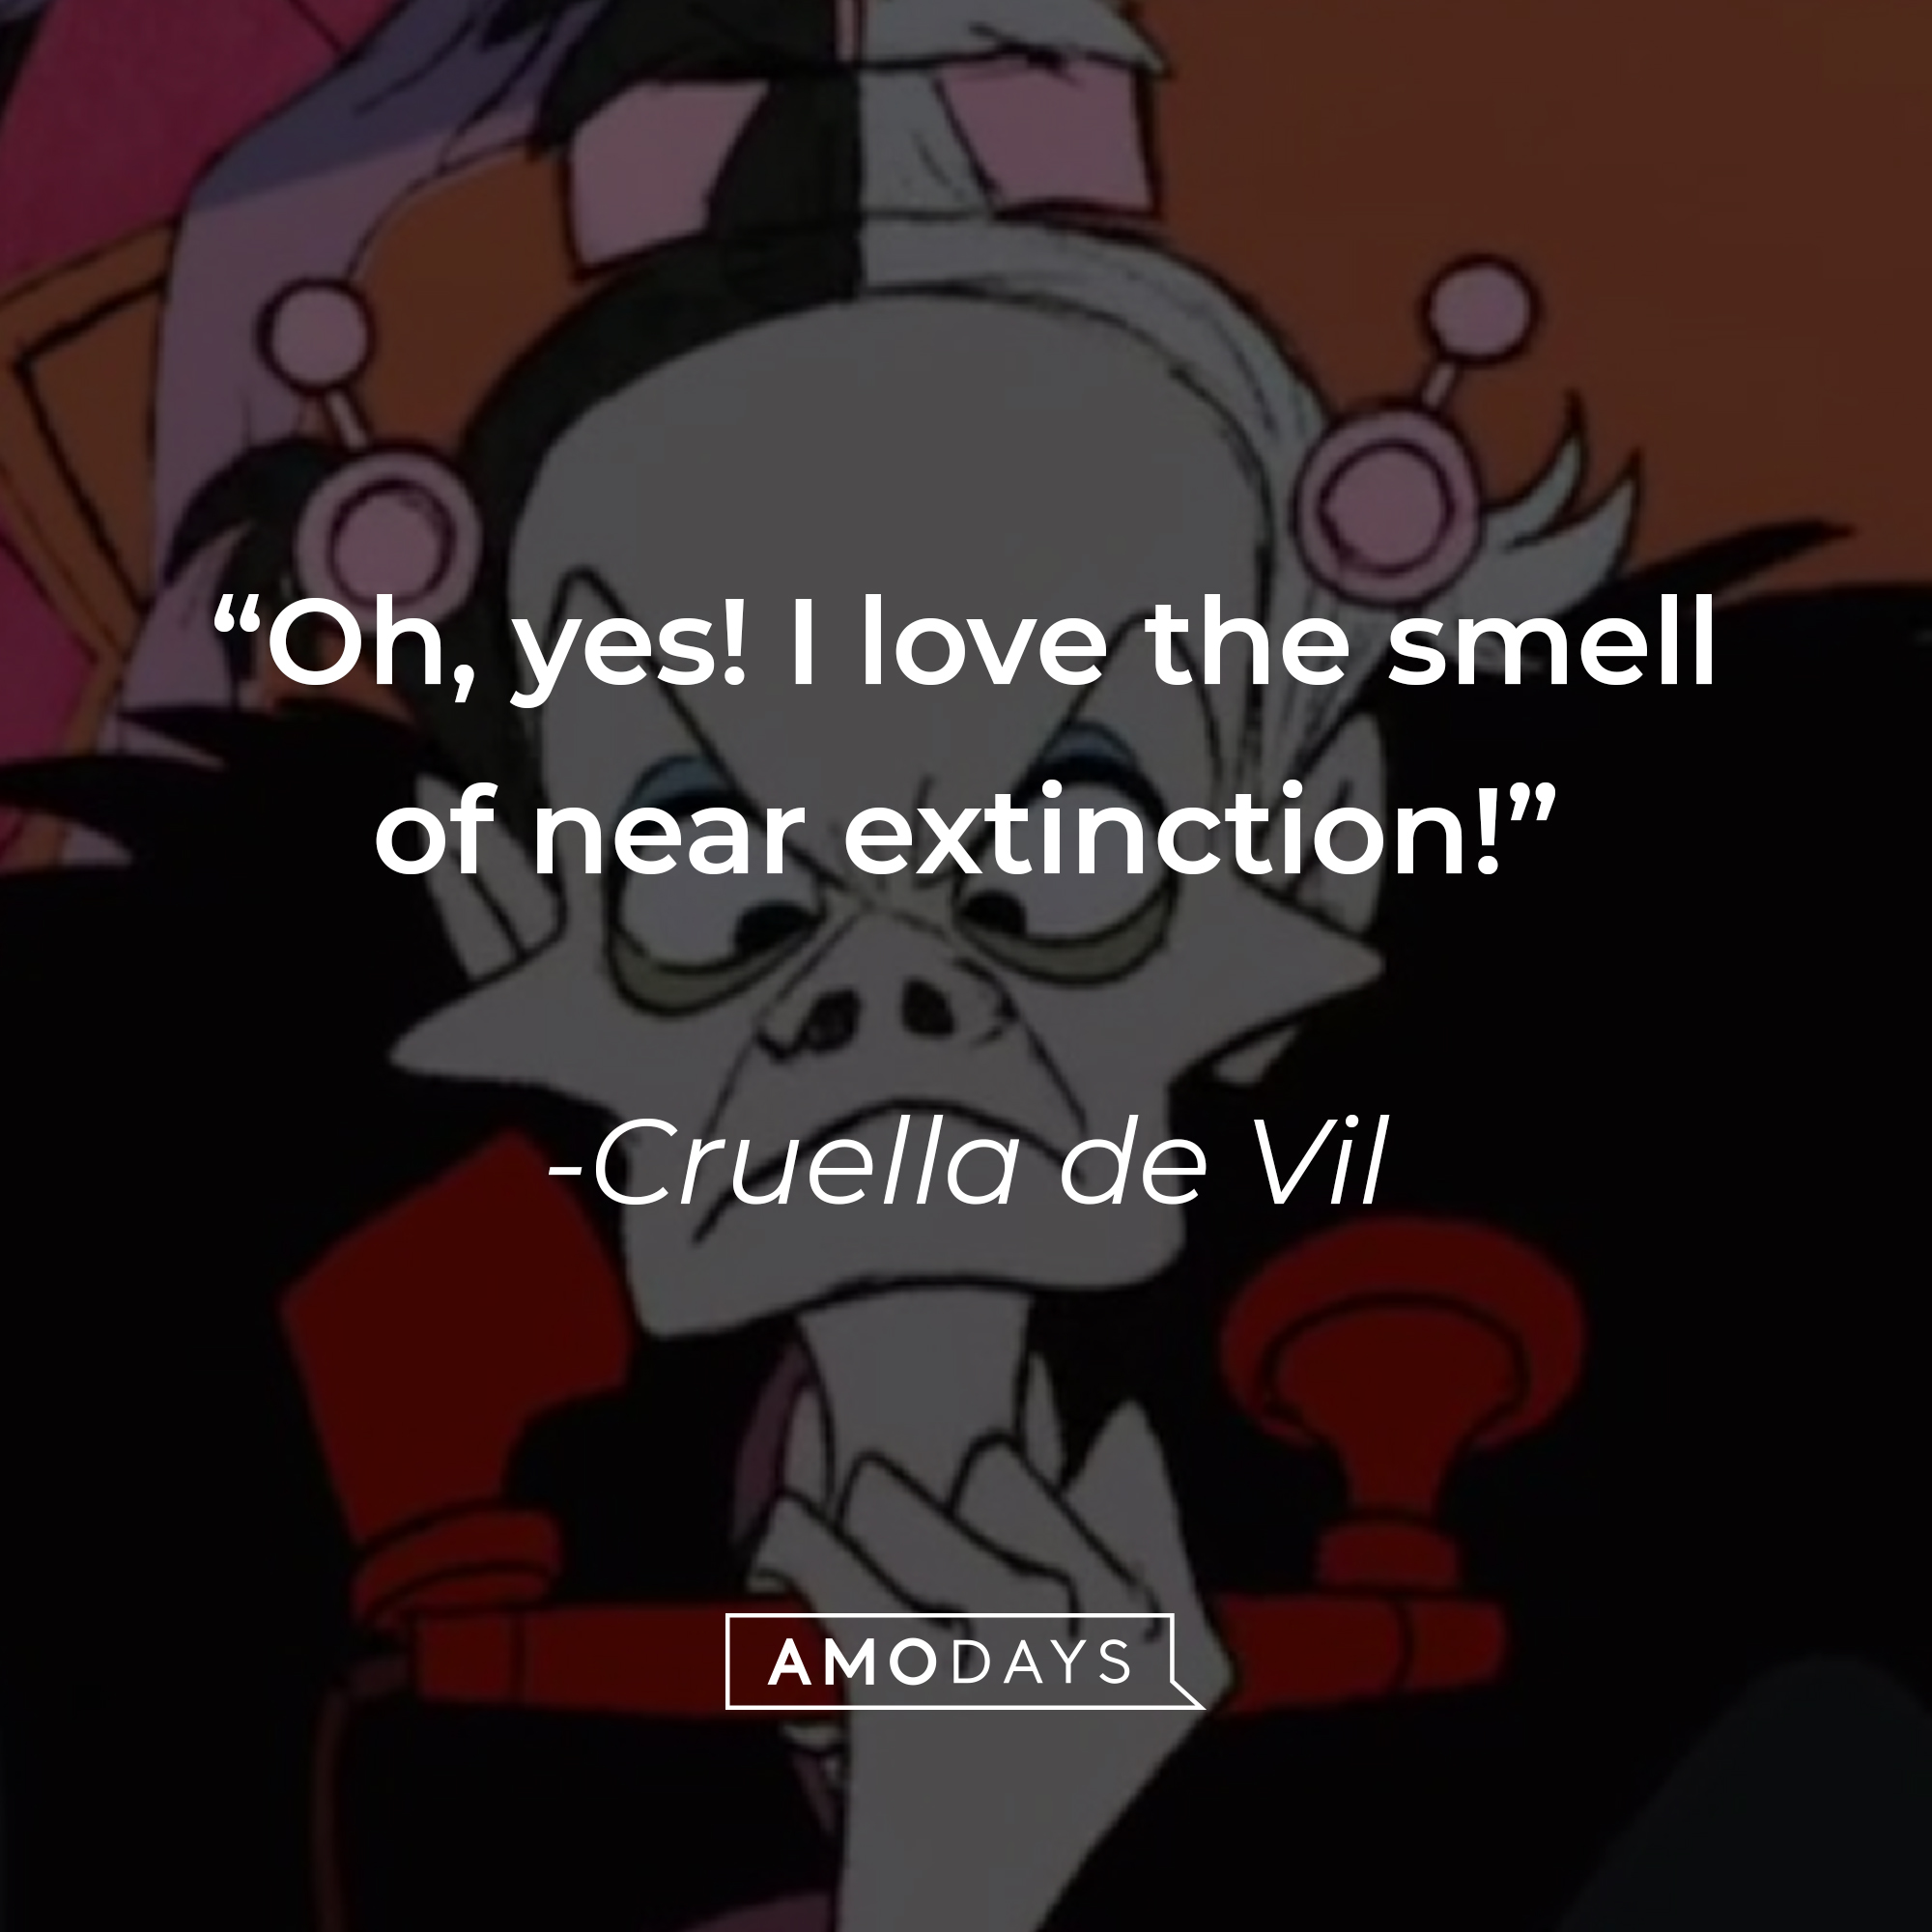 An image of the animated Cruella de Vil, with a quote from the same adapted character in the 1996 film “101 Dalmatians”: “Oh, yes! I love the smell of near extinction!” | Source: Facebook.com/DisneyCruellaDeVil